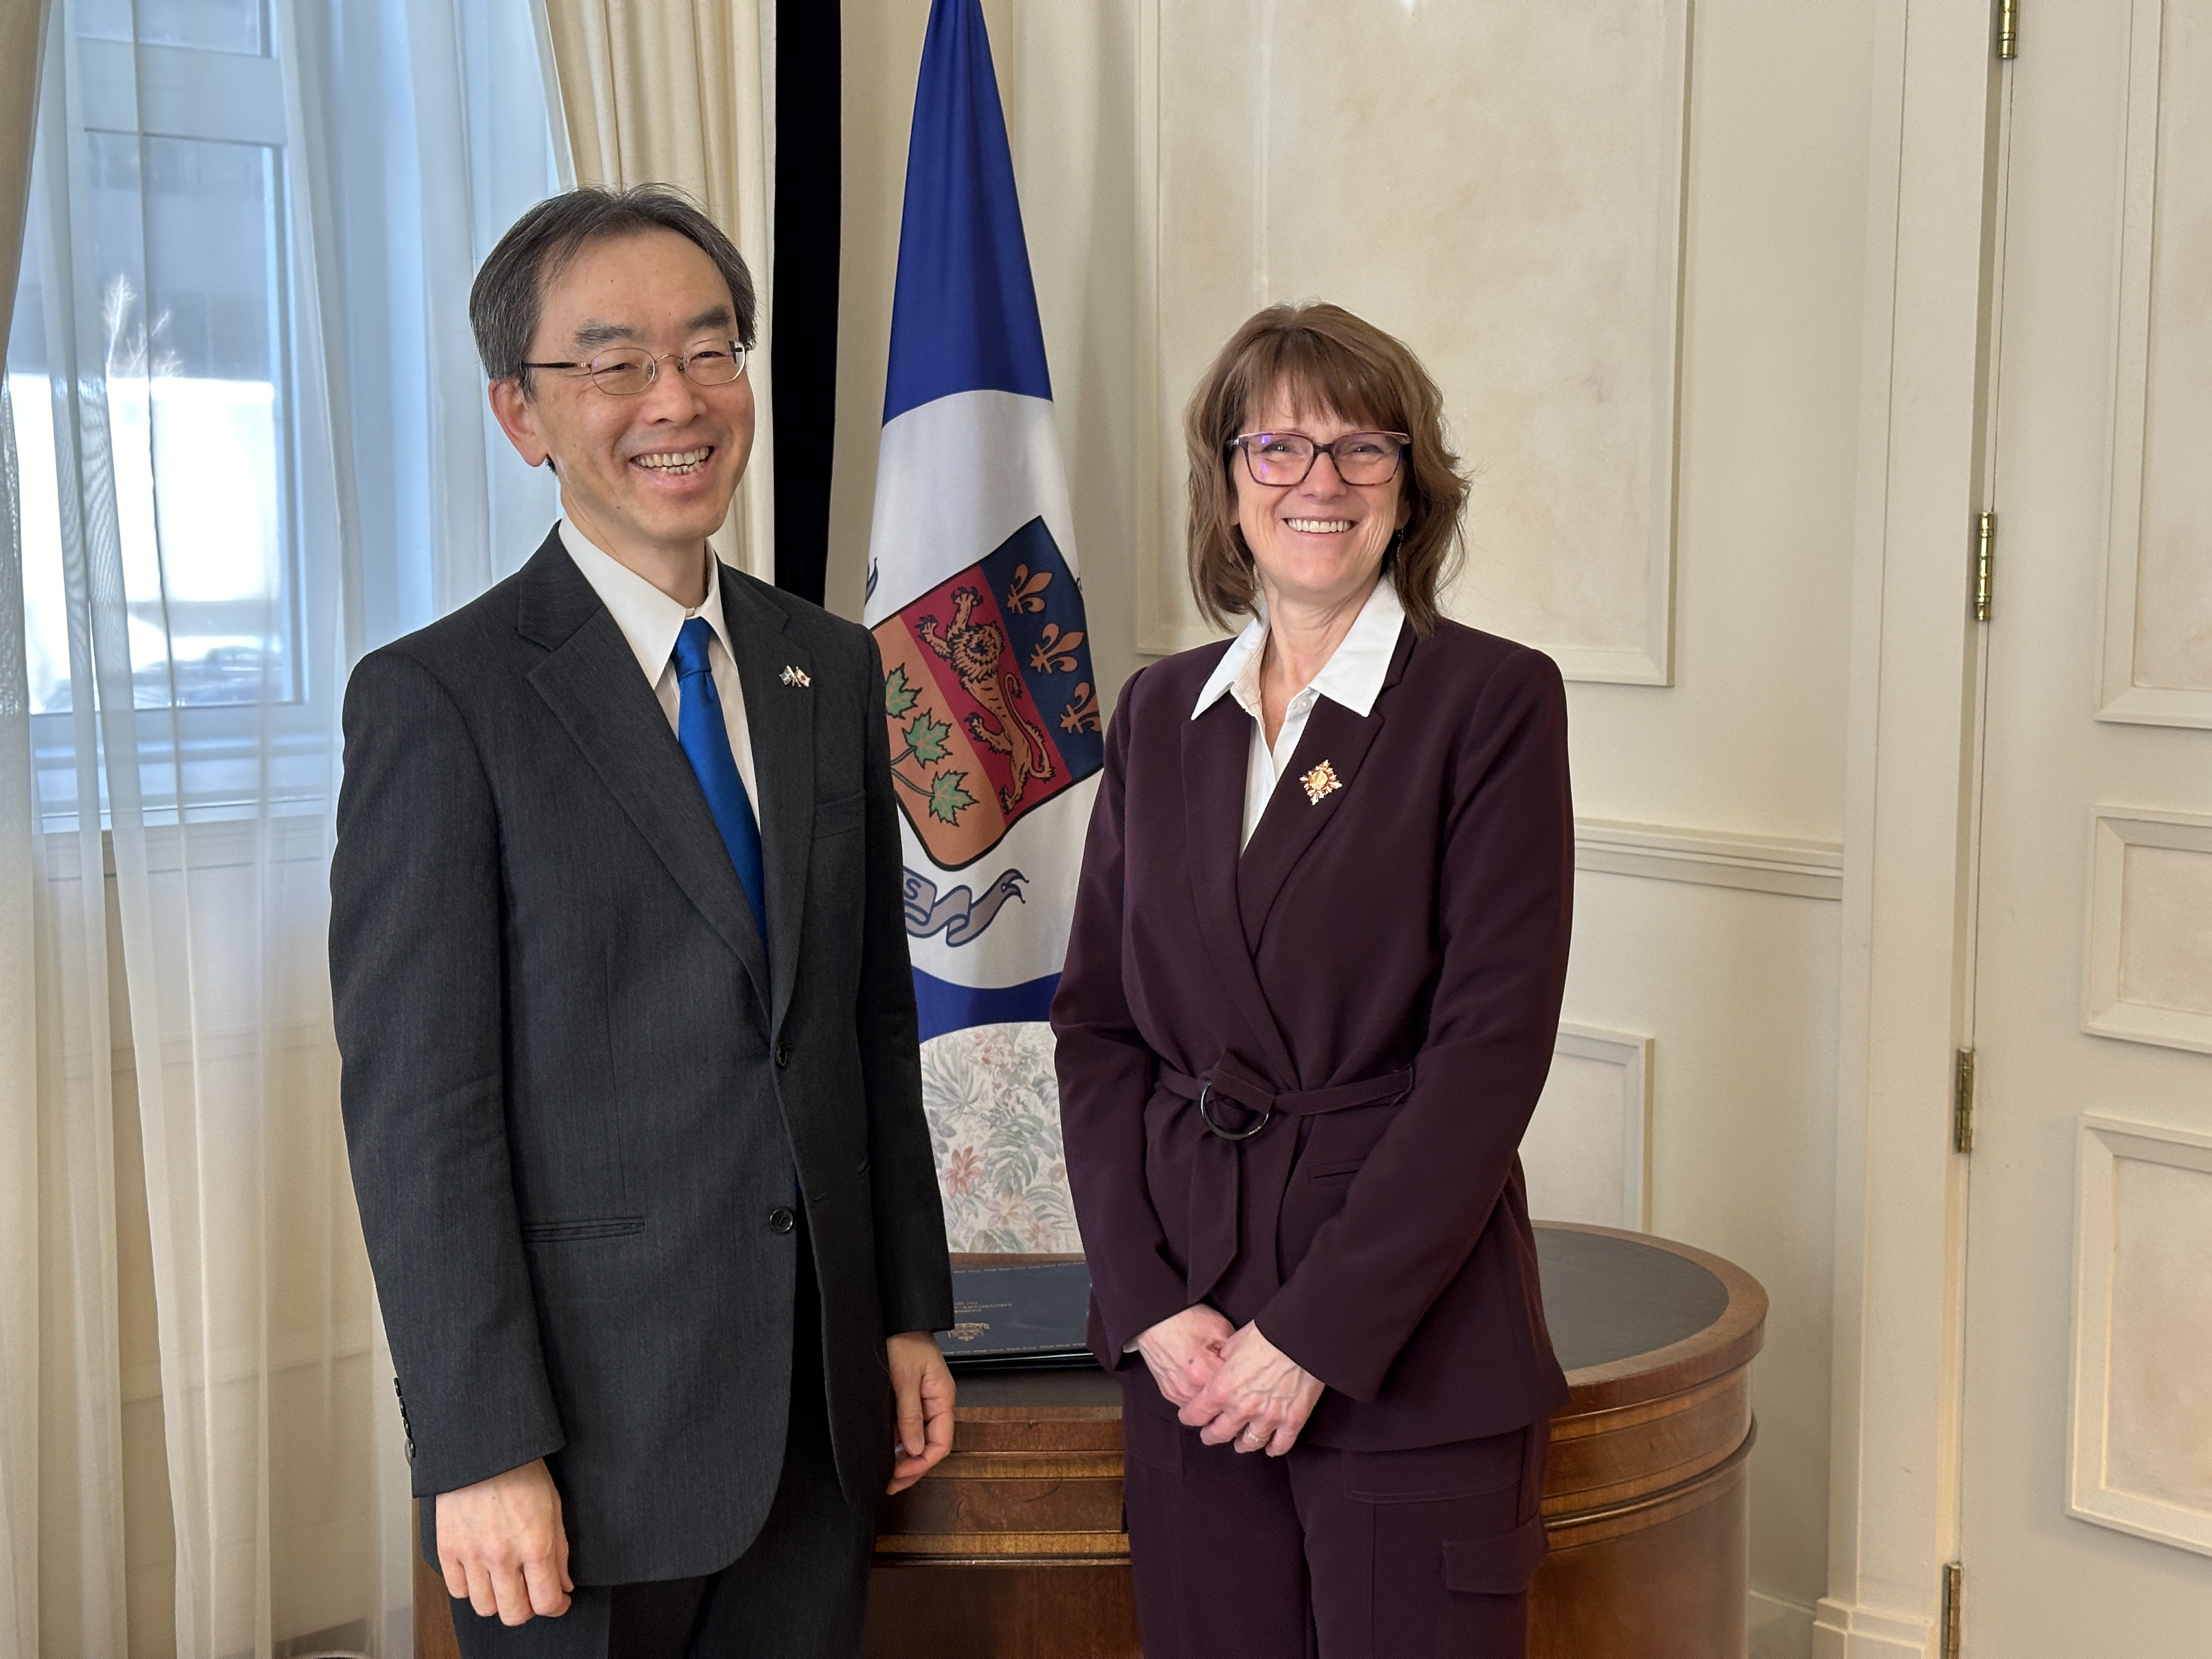 Welcome visit of Mr. Akihiko Uchikawa, Consul General of Japan in Montreal, for his assumption of office

